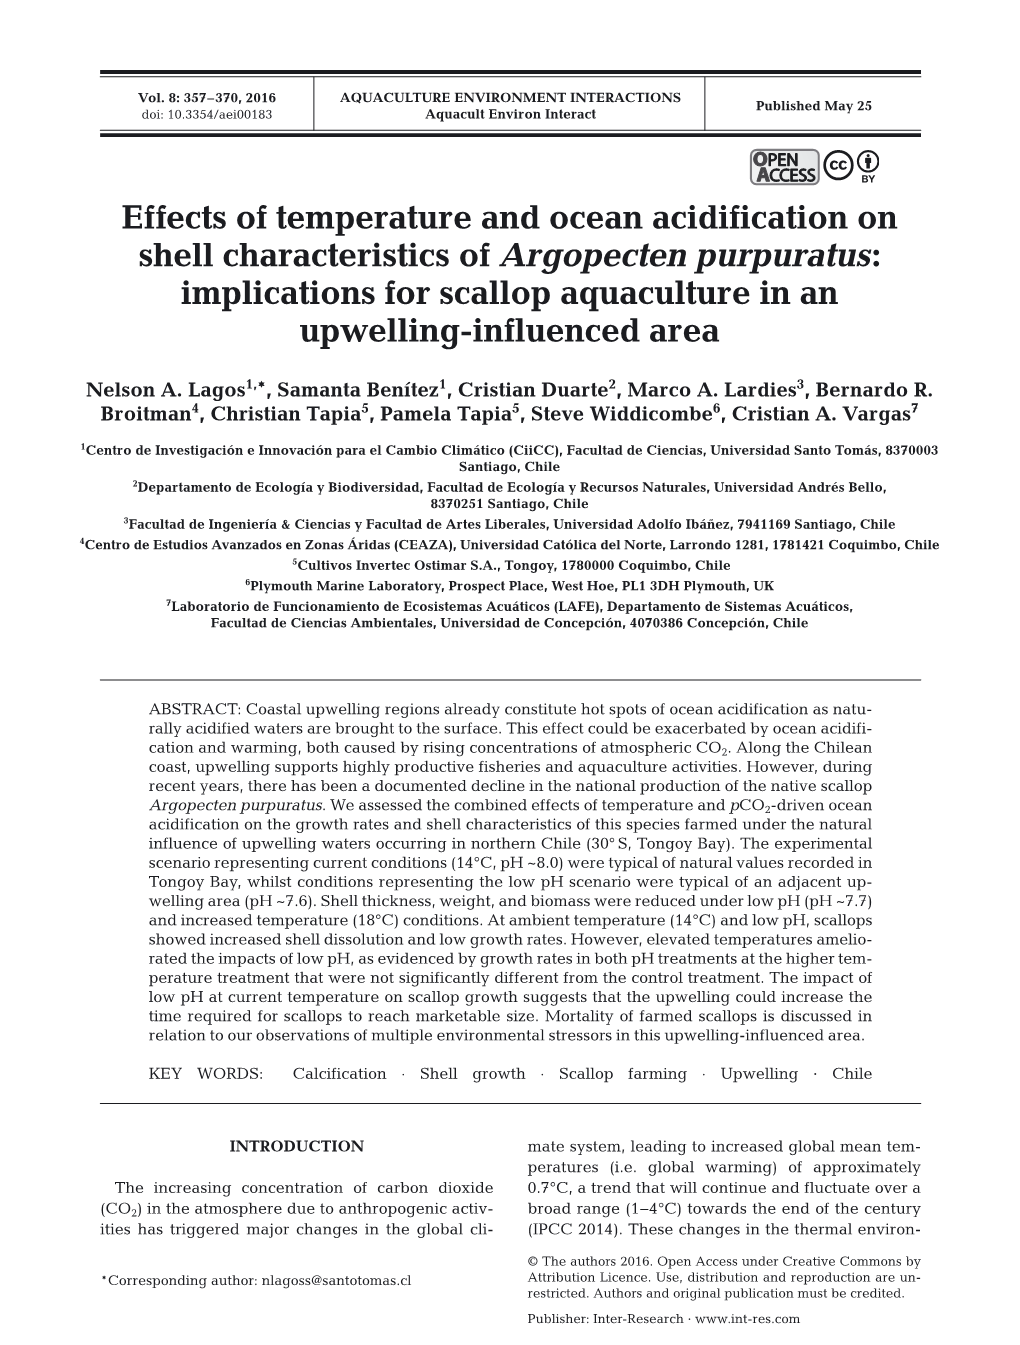 Effects of Temperature and Ocean Acidification on Shell Characteristics of Argopecten Purpuratus: Implications for Scallop Aquaculture in an Upwelling-Influenced Area